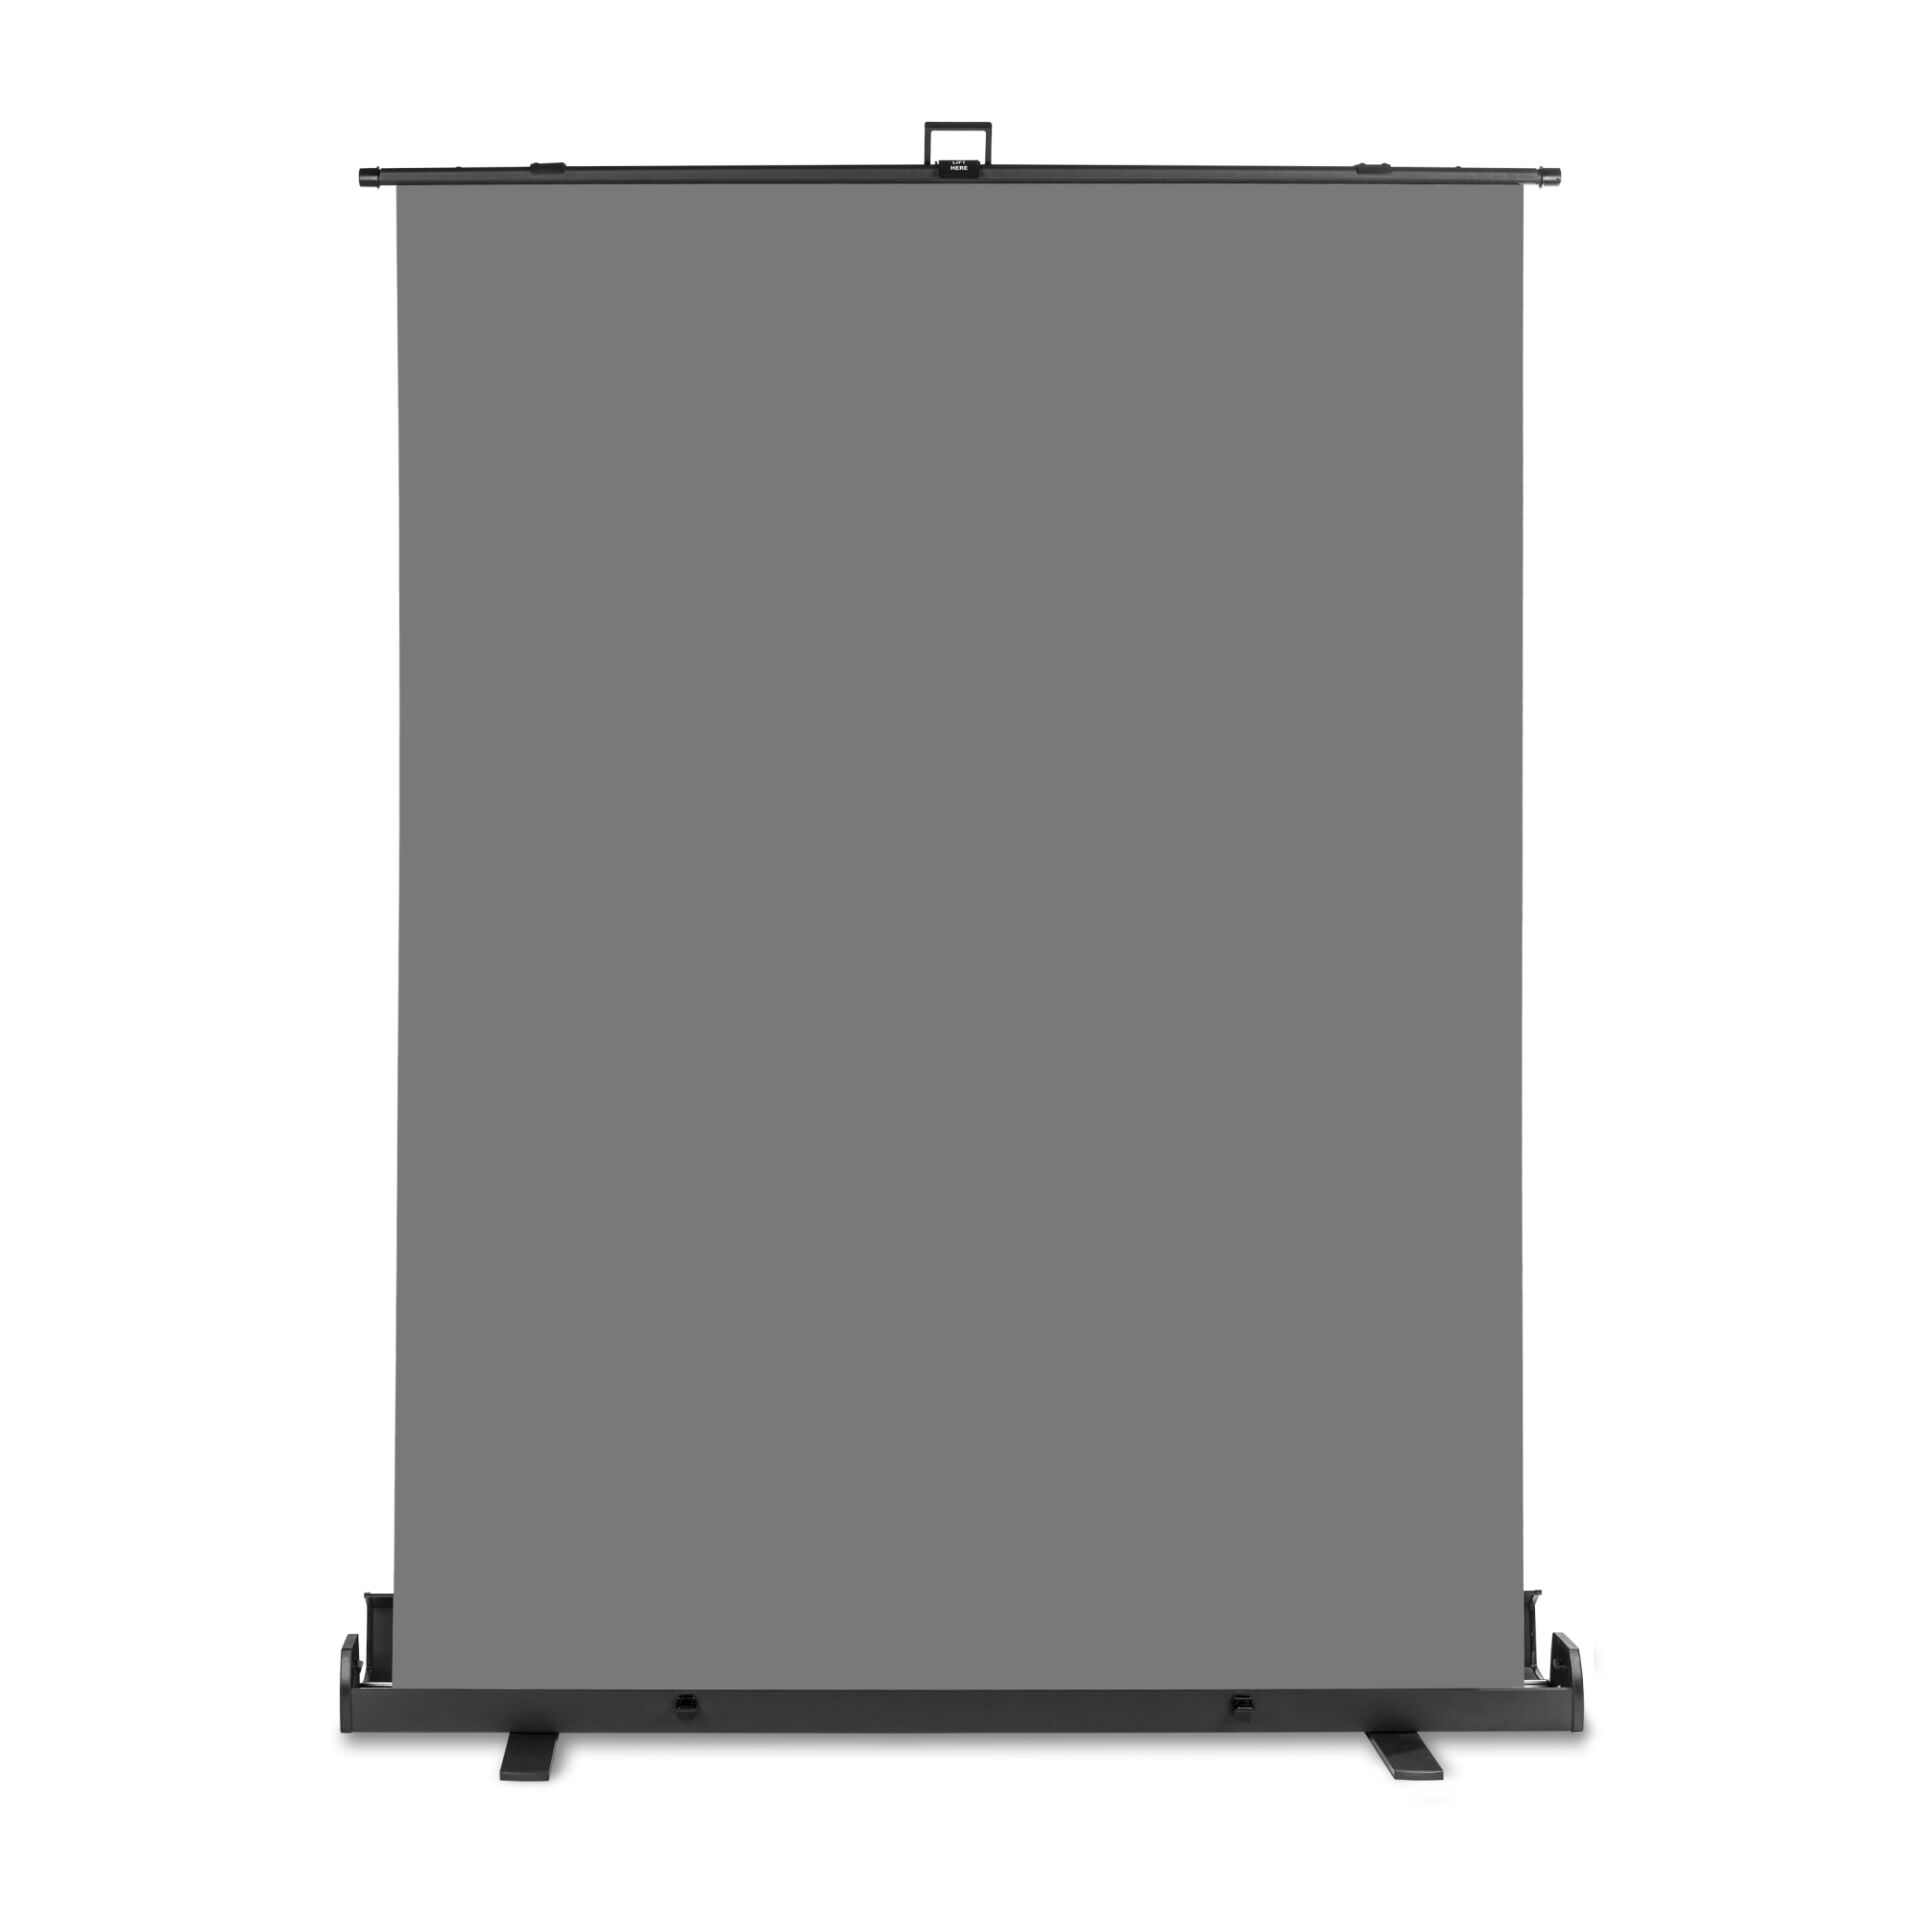 Walimex pro Roll-up Panel Background 155x200cm grey